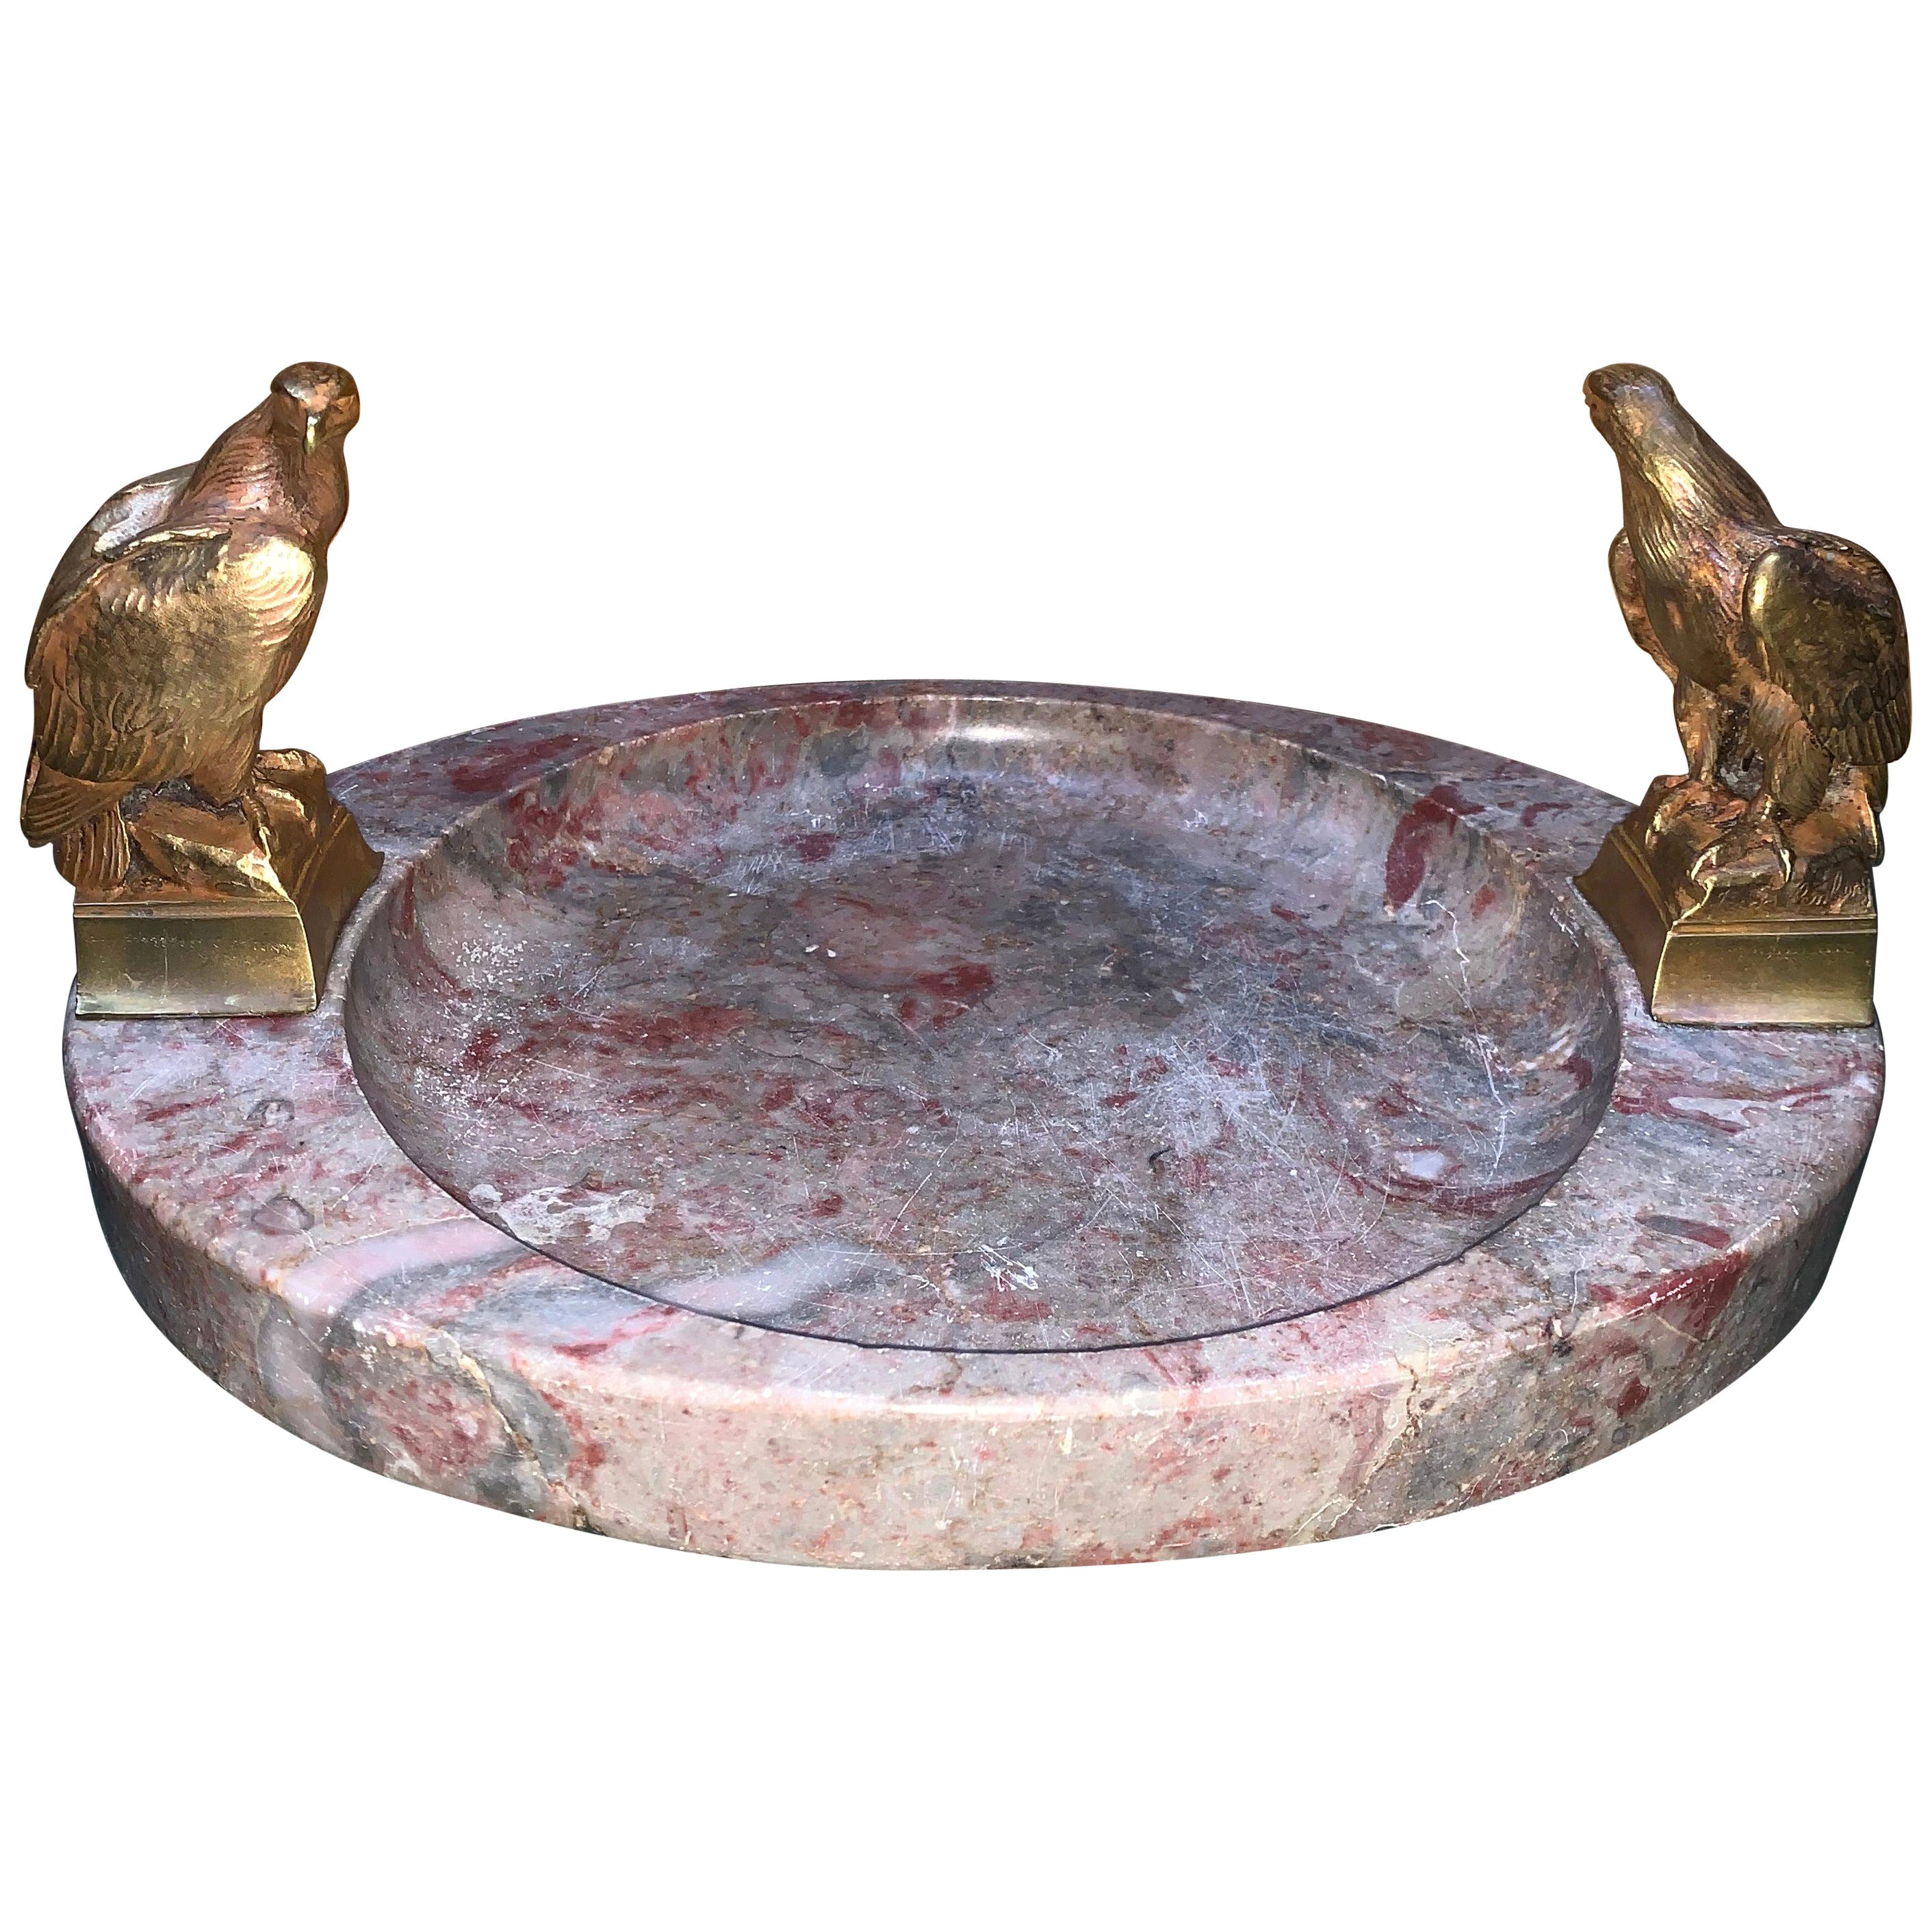 Large Signed Oval Marble Ashtray or Centerpiece With Two-Bronze Eagles For Sale